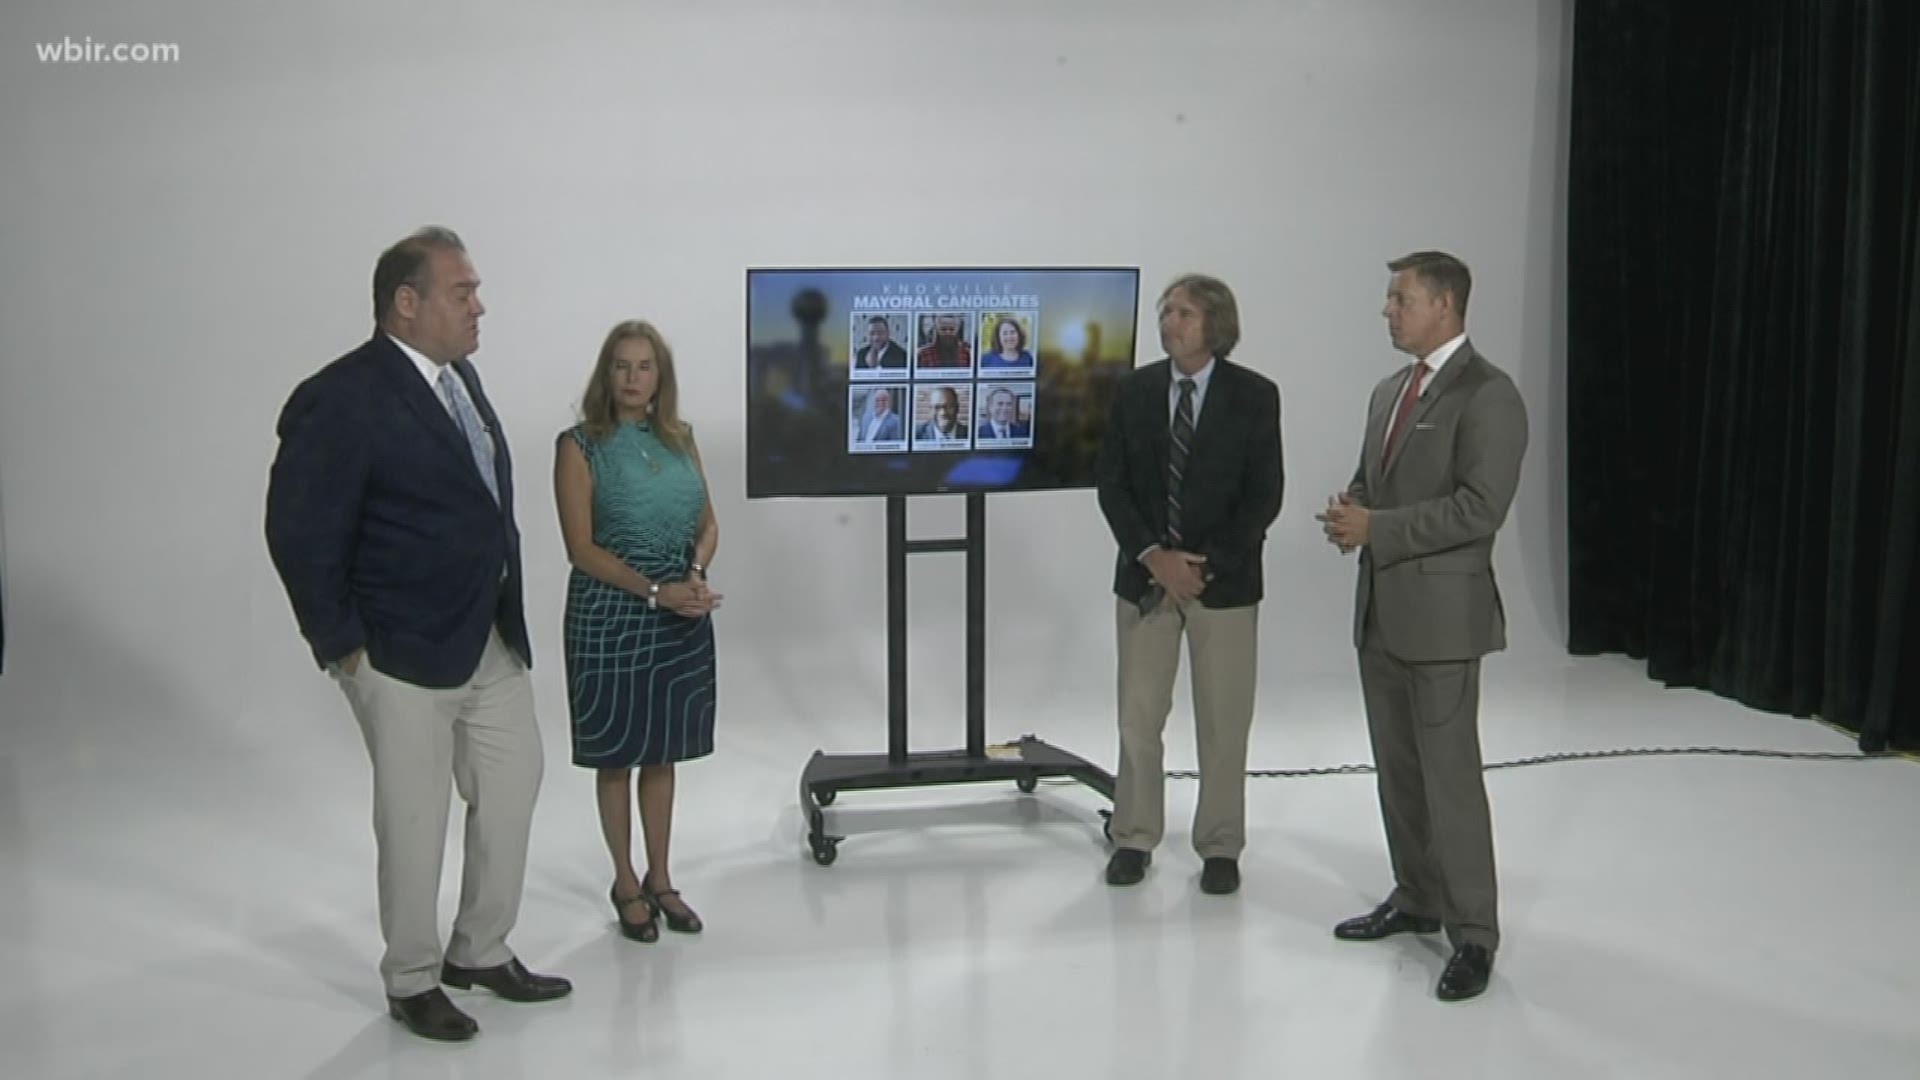 Two analysts join 10News anchor John Becker and reporter John North to break down the finer points of the primary election.